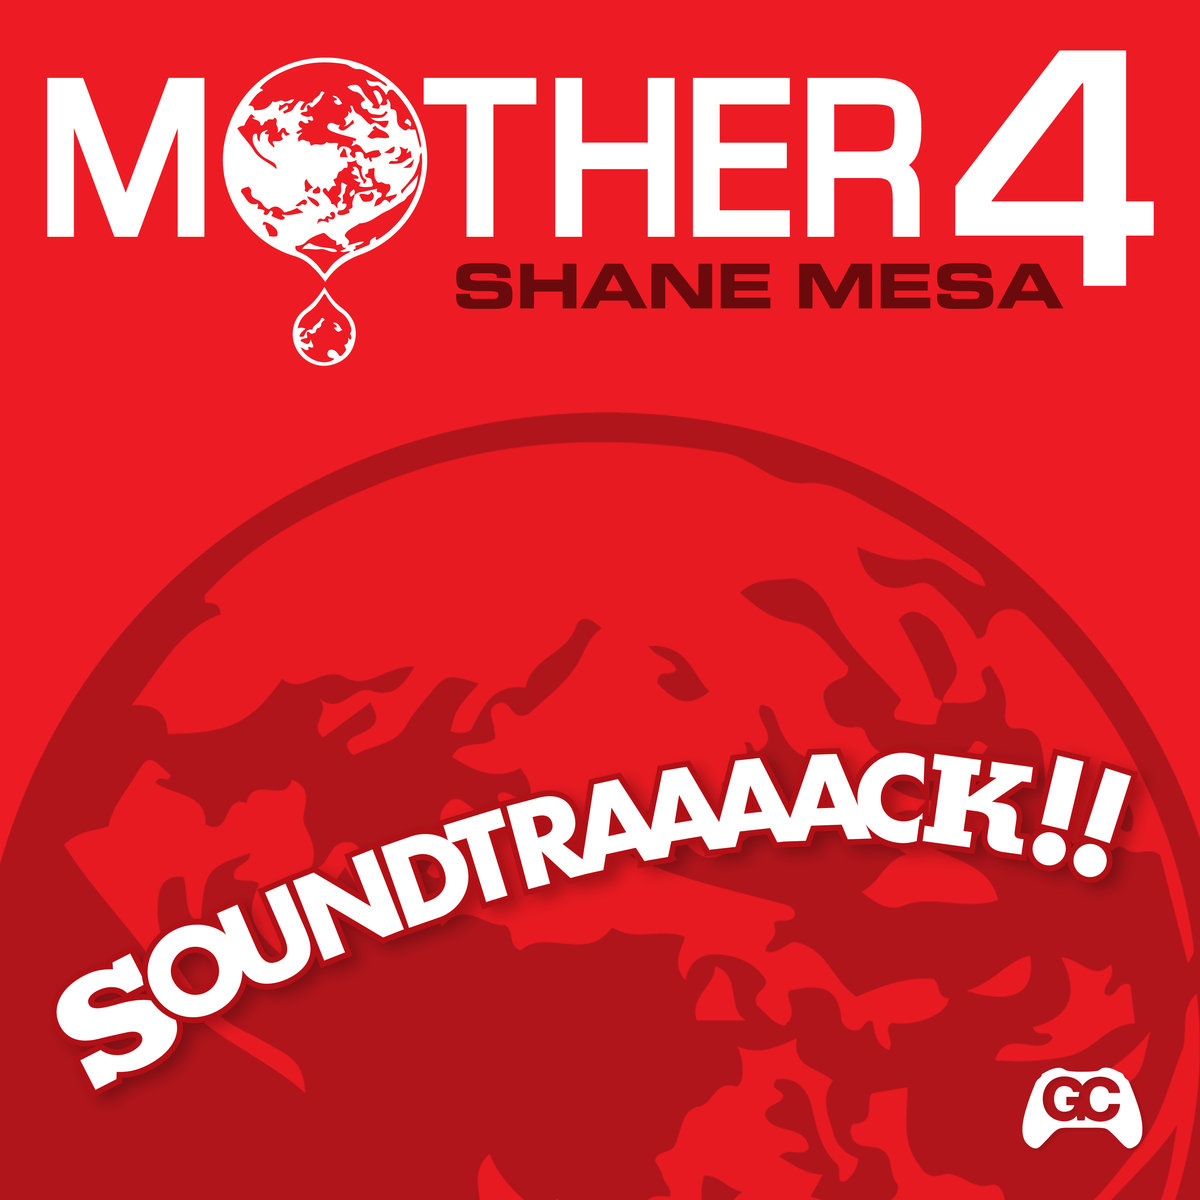 Original Version Soundtrack to Earthbound Fan Mother 4 Now Available - Original Sound